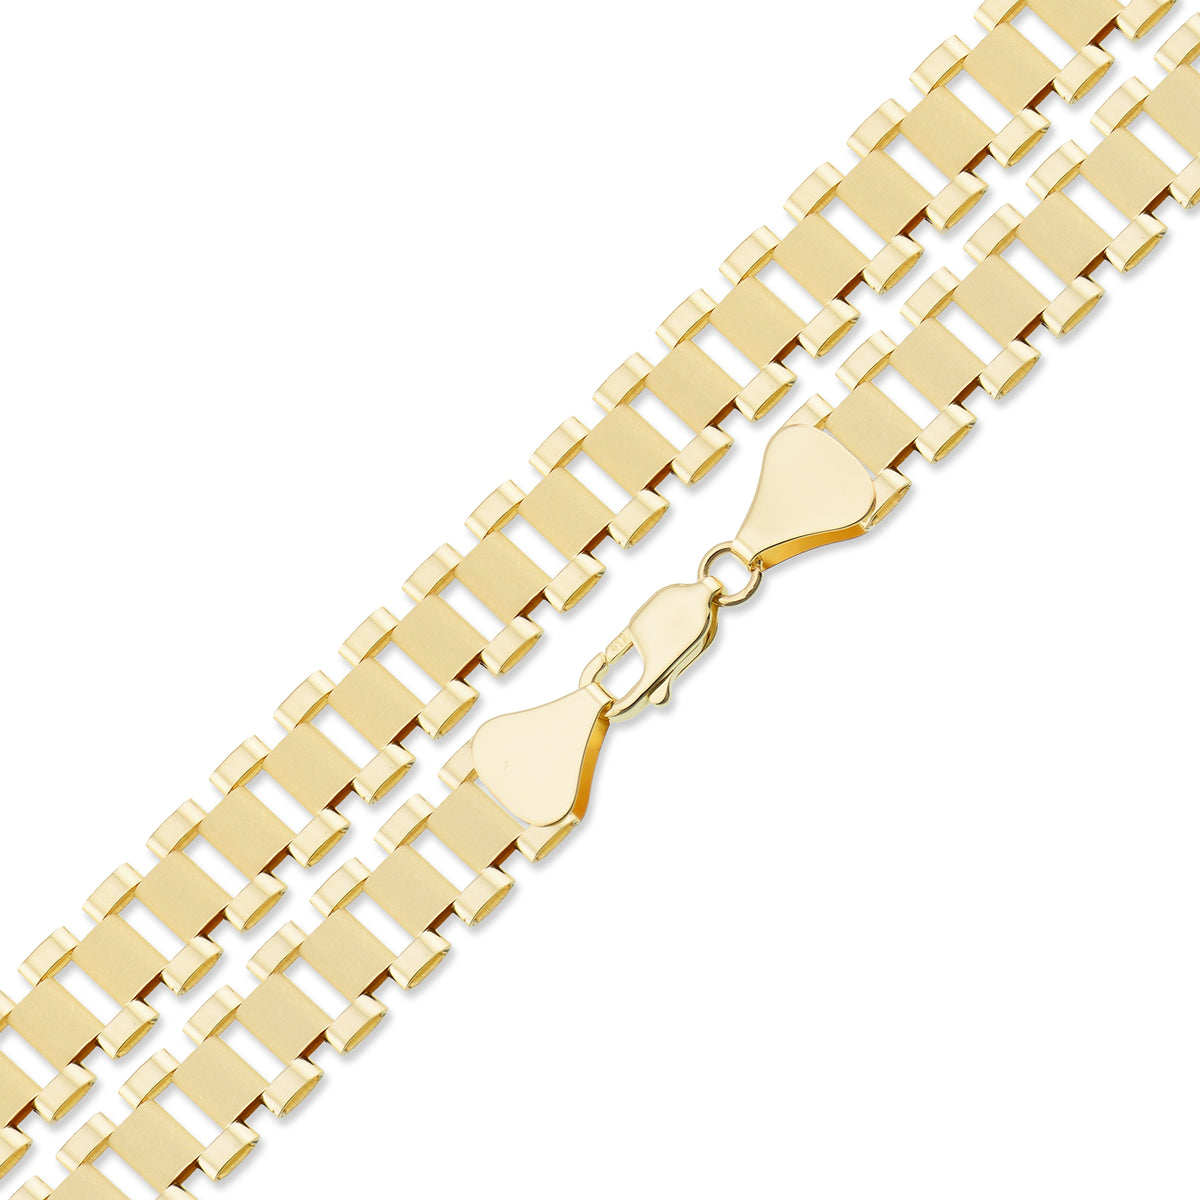 10K Real Gold 10 MM Presidential Watch Band Style Link Necklace Chain